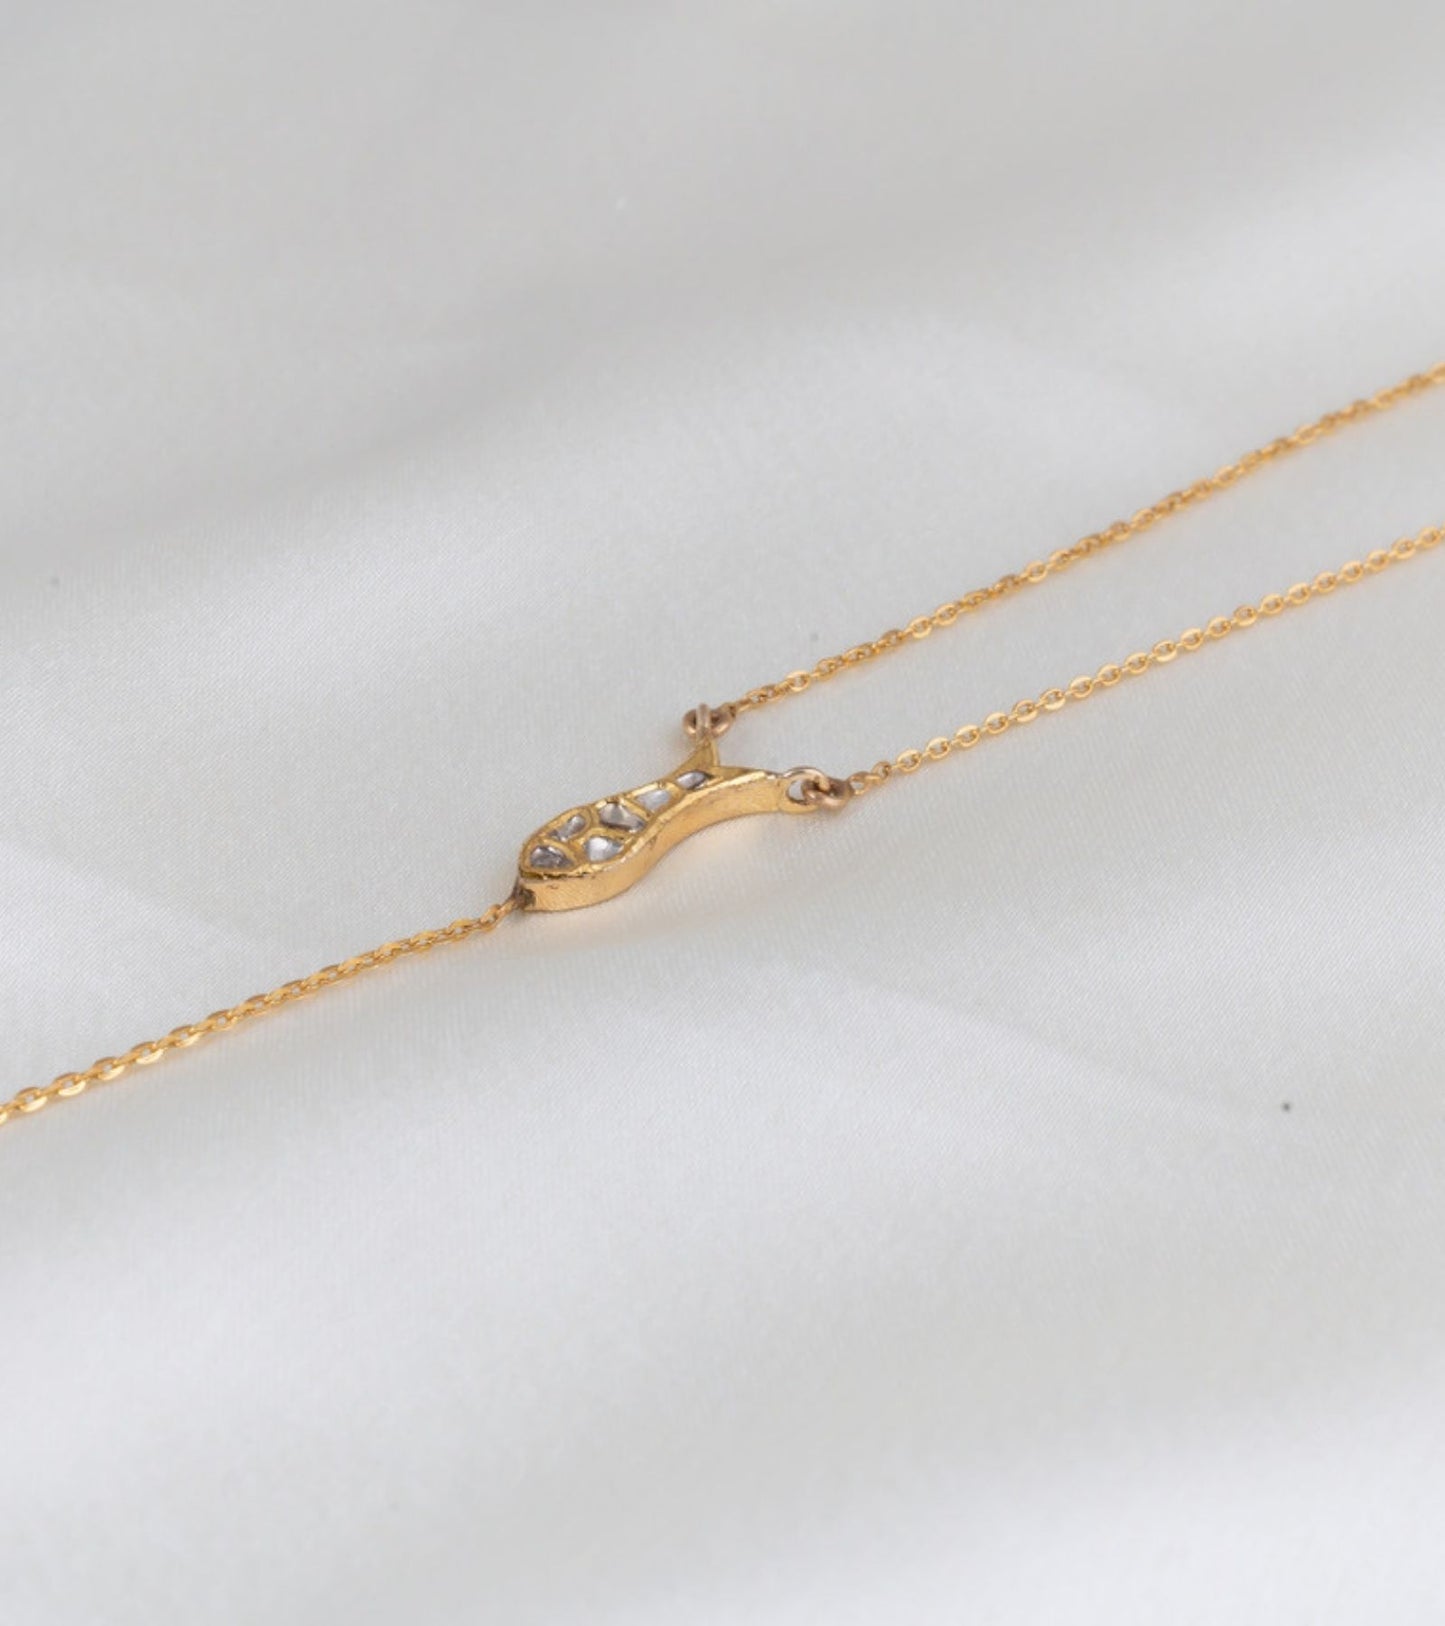 The Fish Polki Necklace with Crystal Dangler in Gold